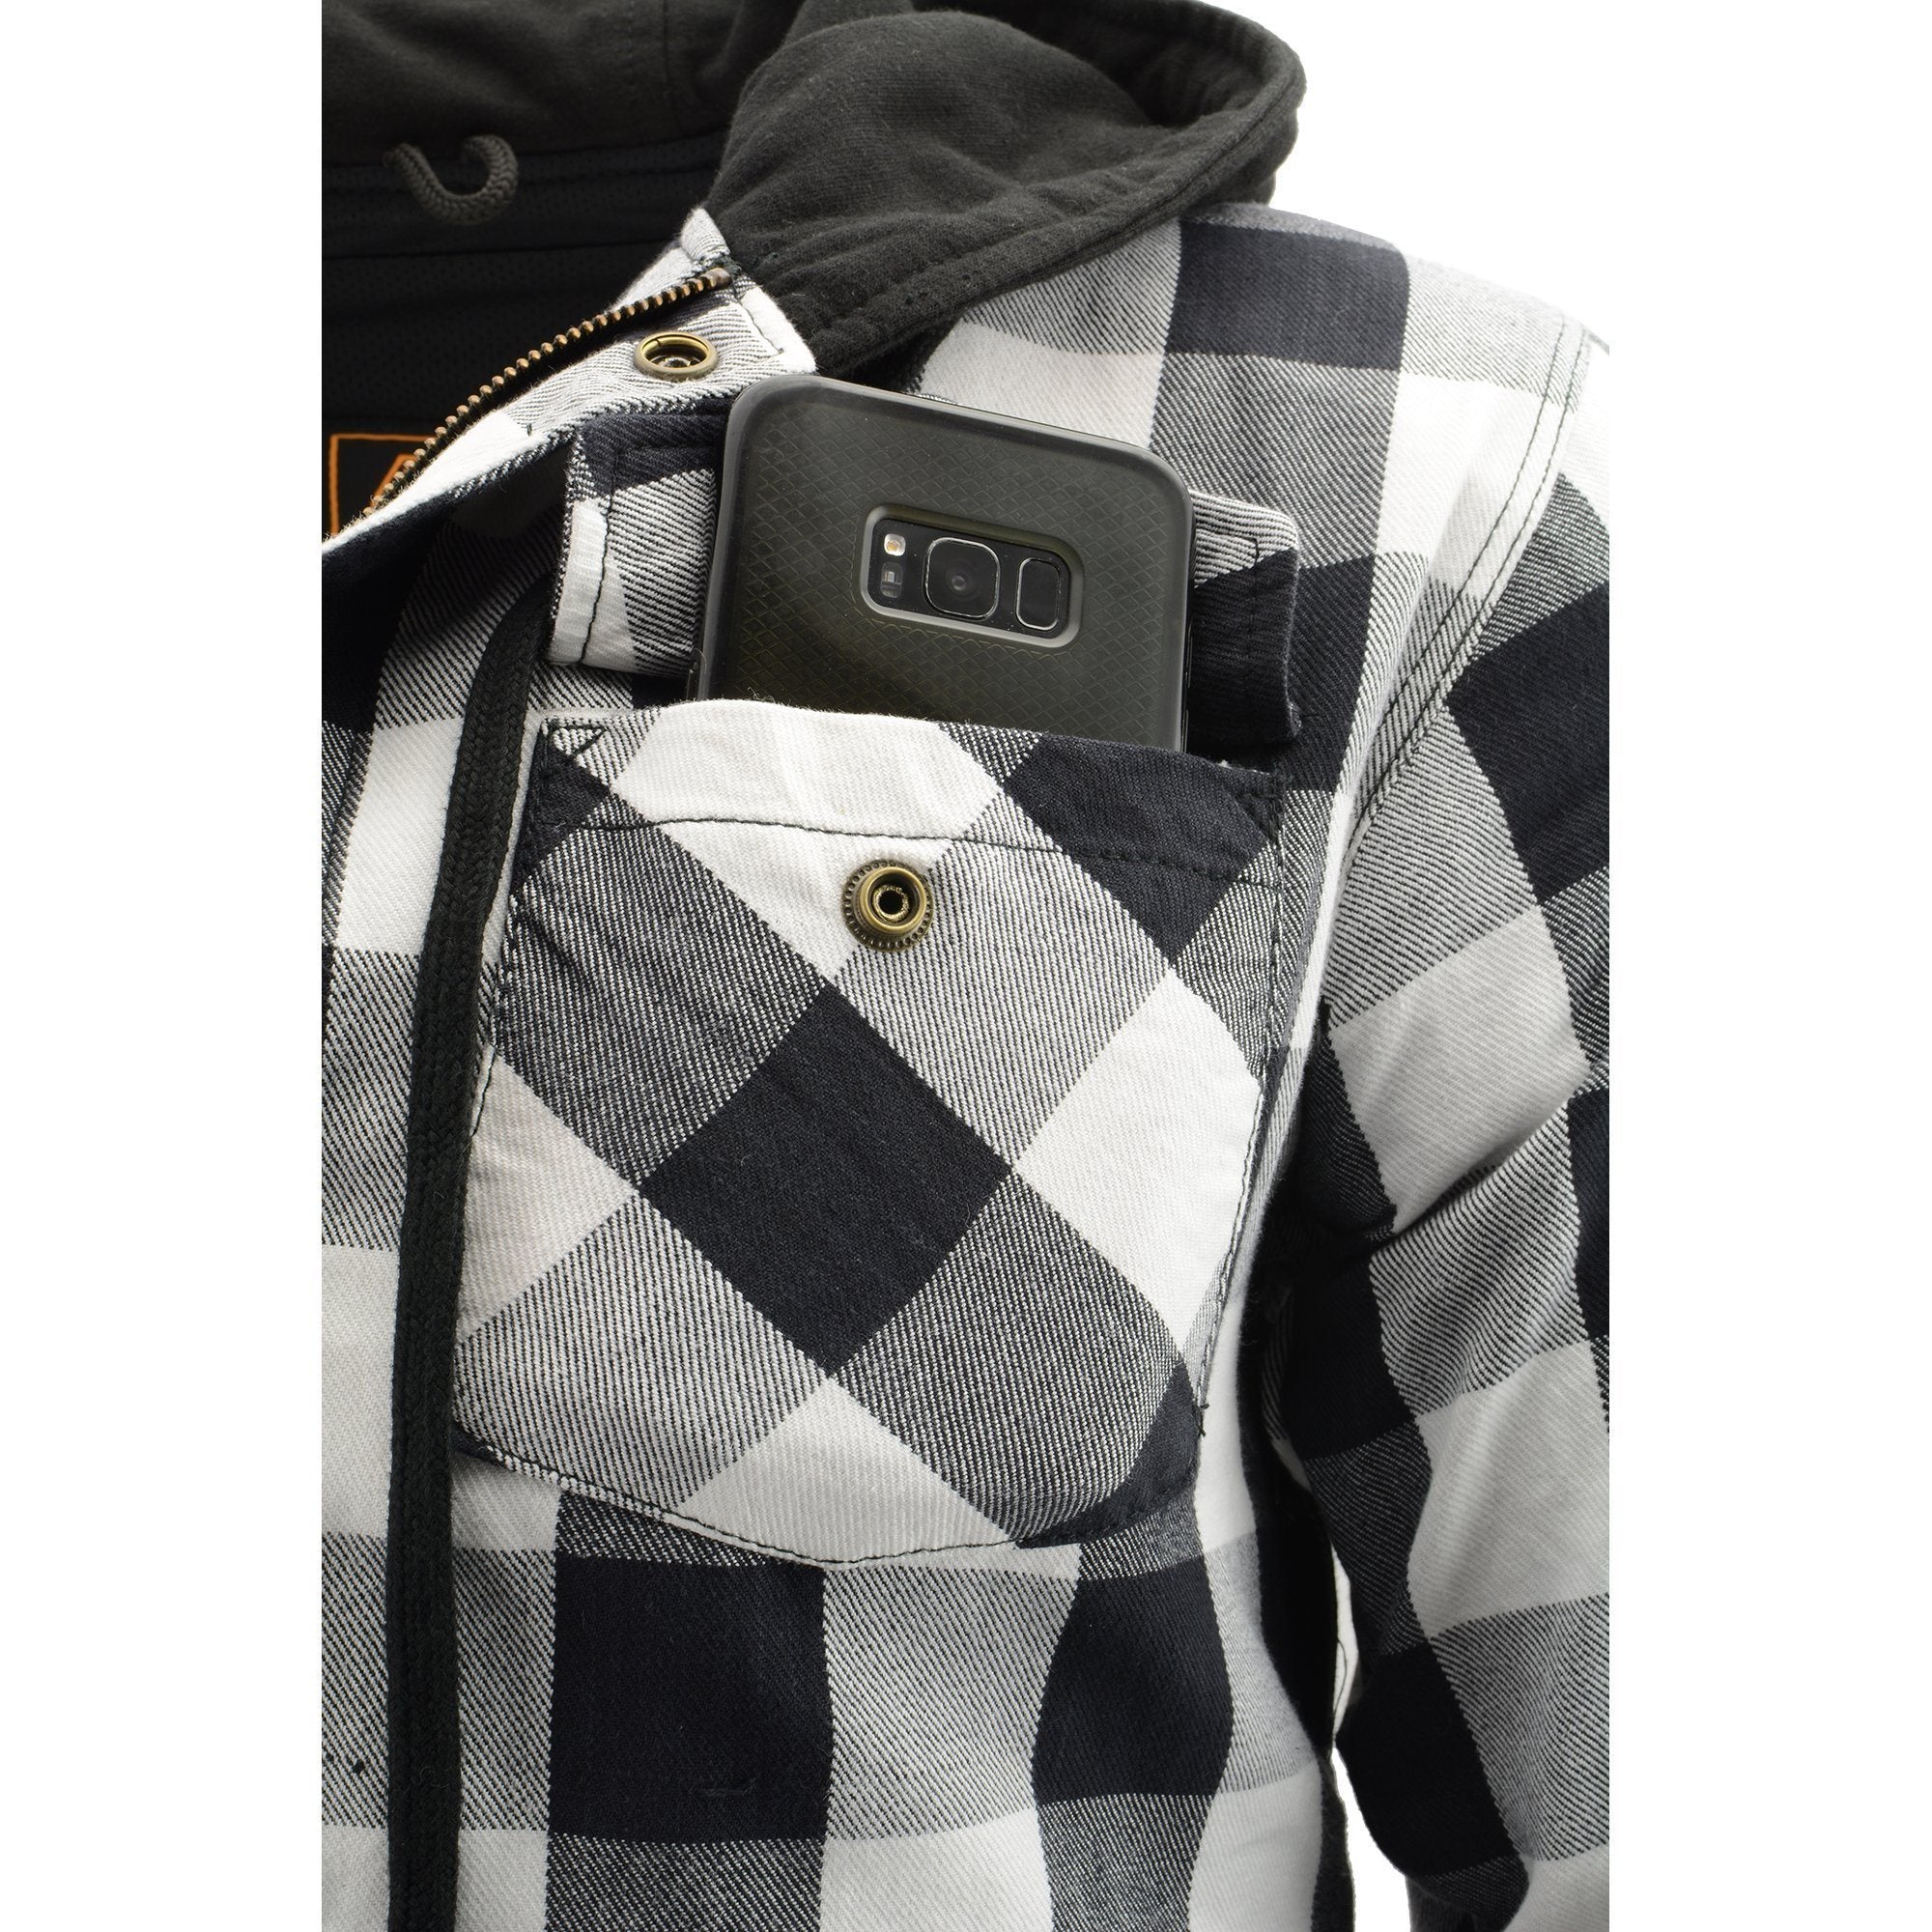 Milwaukee Performance MPM1629 Men's Black and White Armored Hooded Flannel Shirt with Aramid by DuPont Fibers